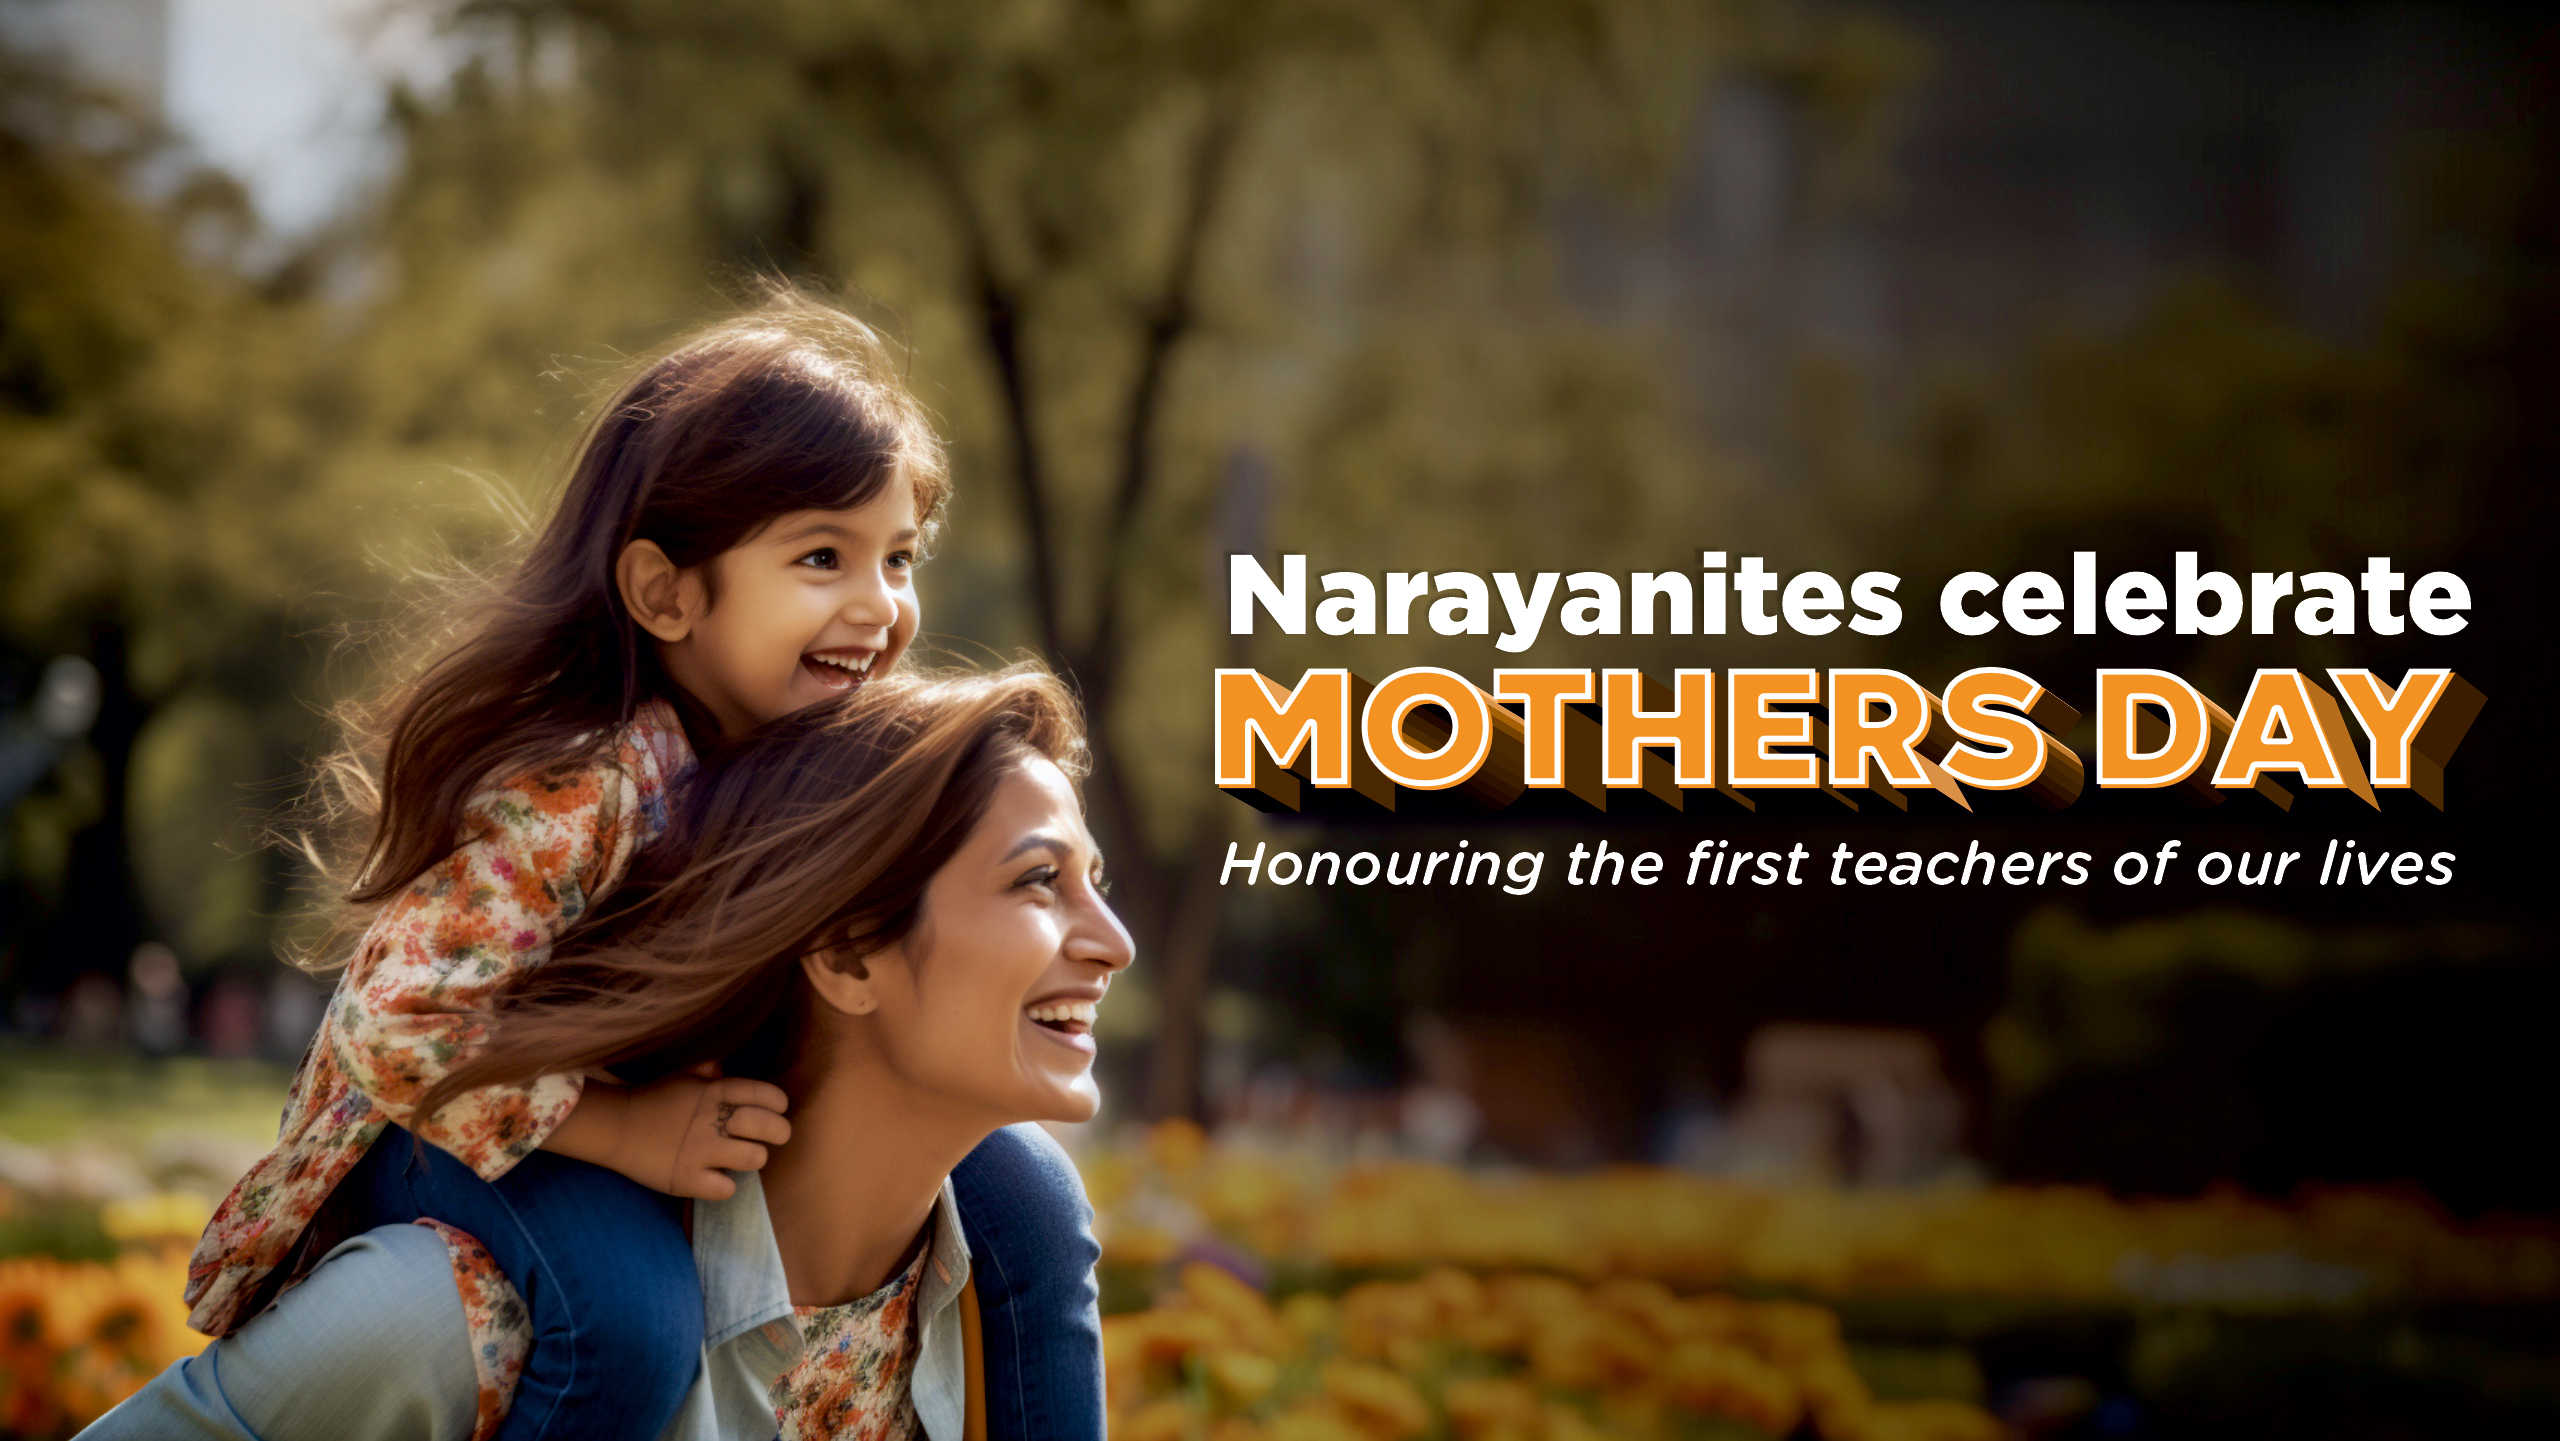 Narayanites Celebrate Mother’s Day: Honouring the First Teachers of Our Lives